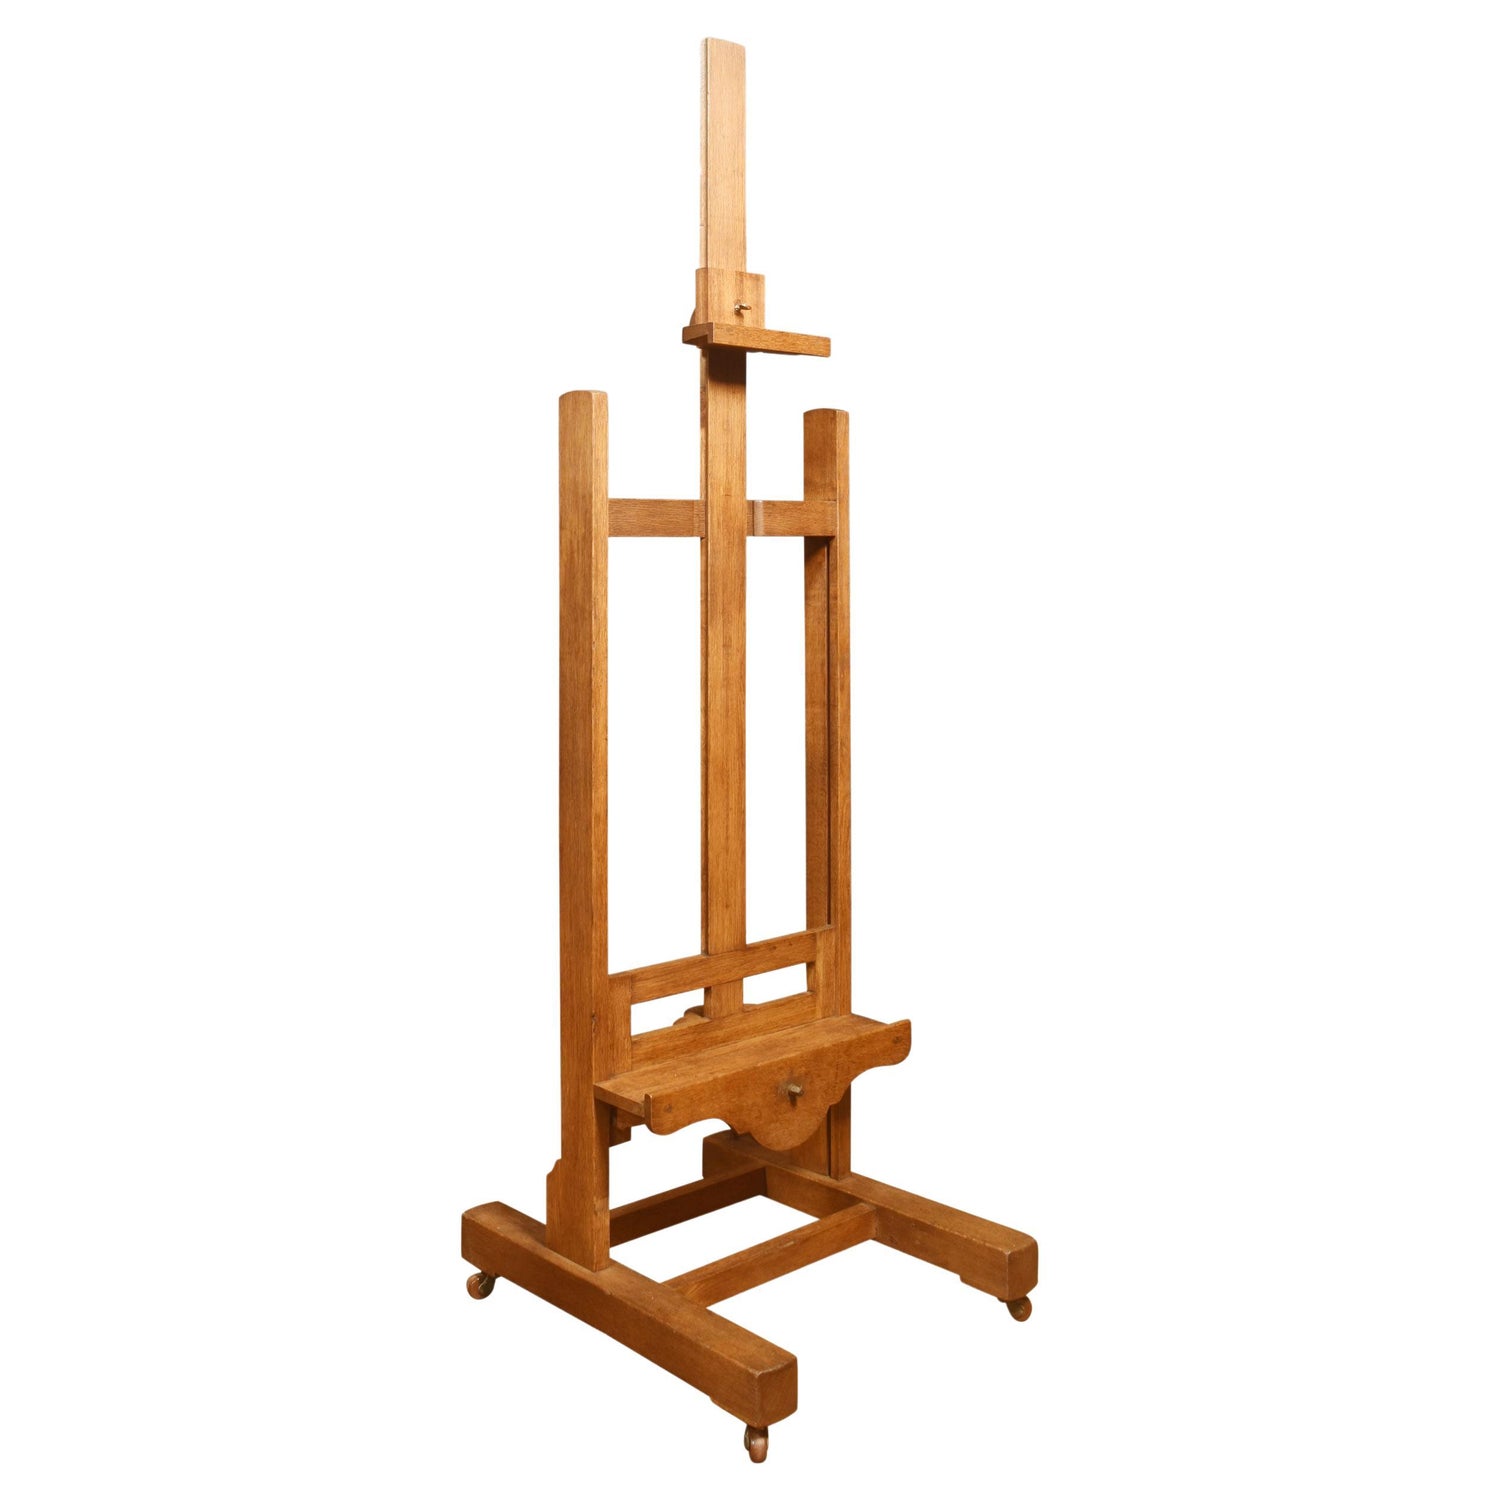 Second Life Marketplace - Easels Big and Small Easel with Free Painting